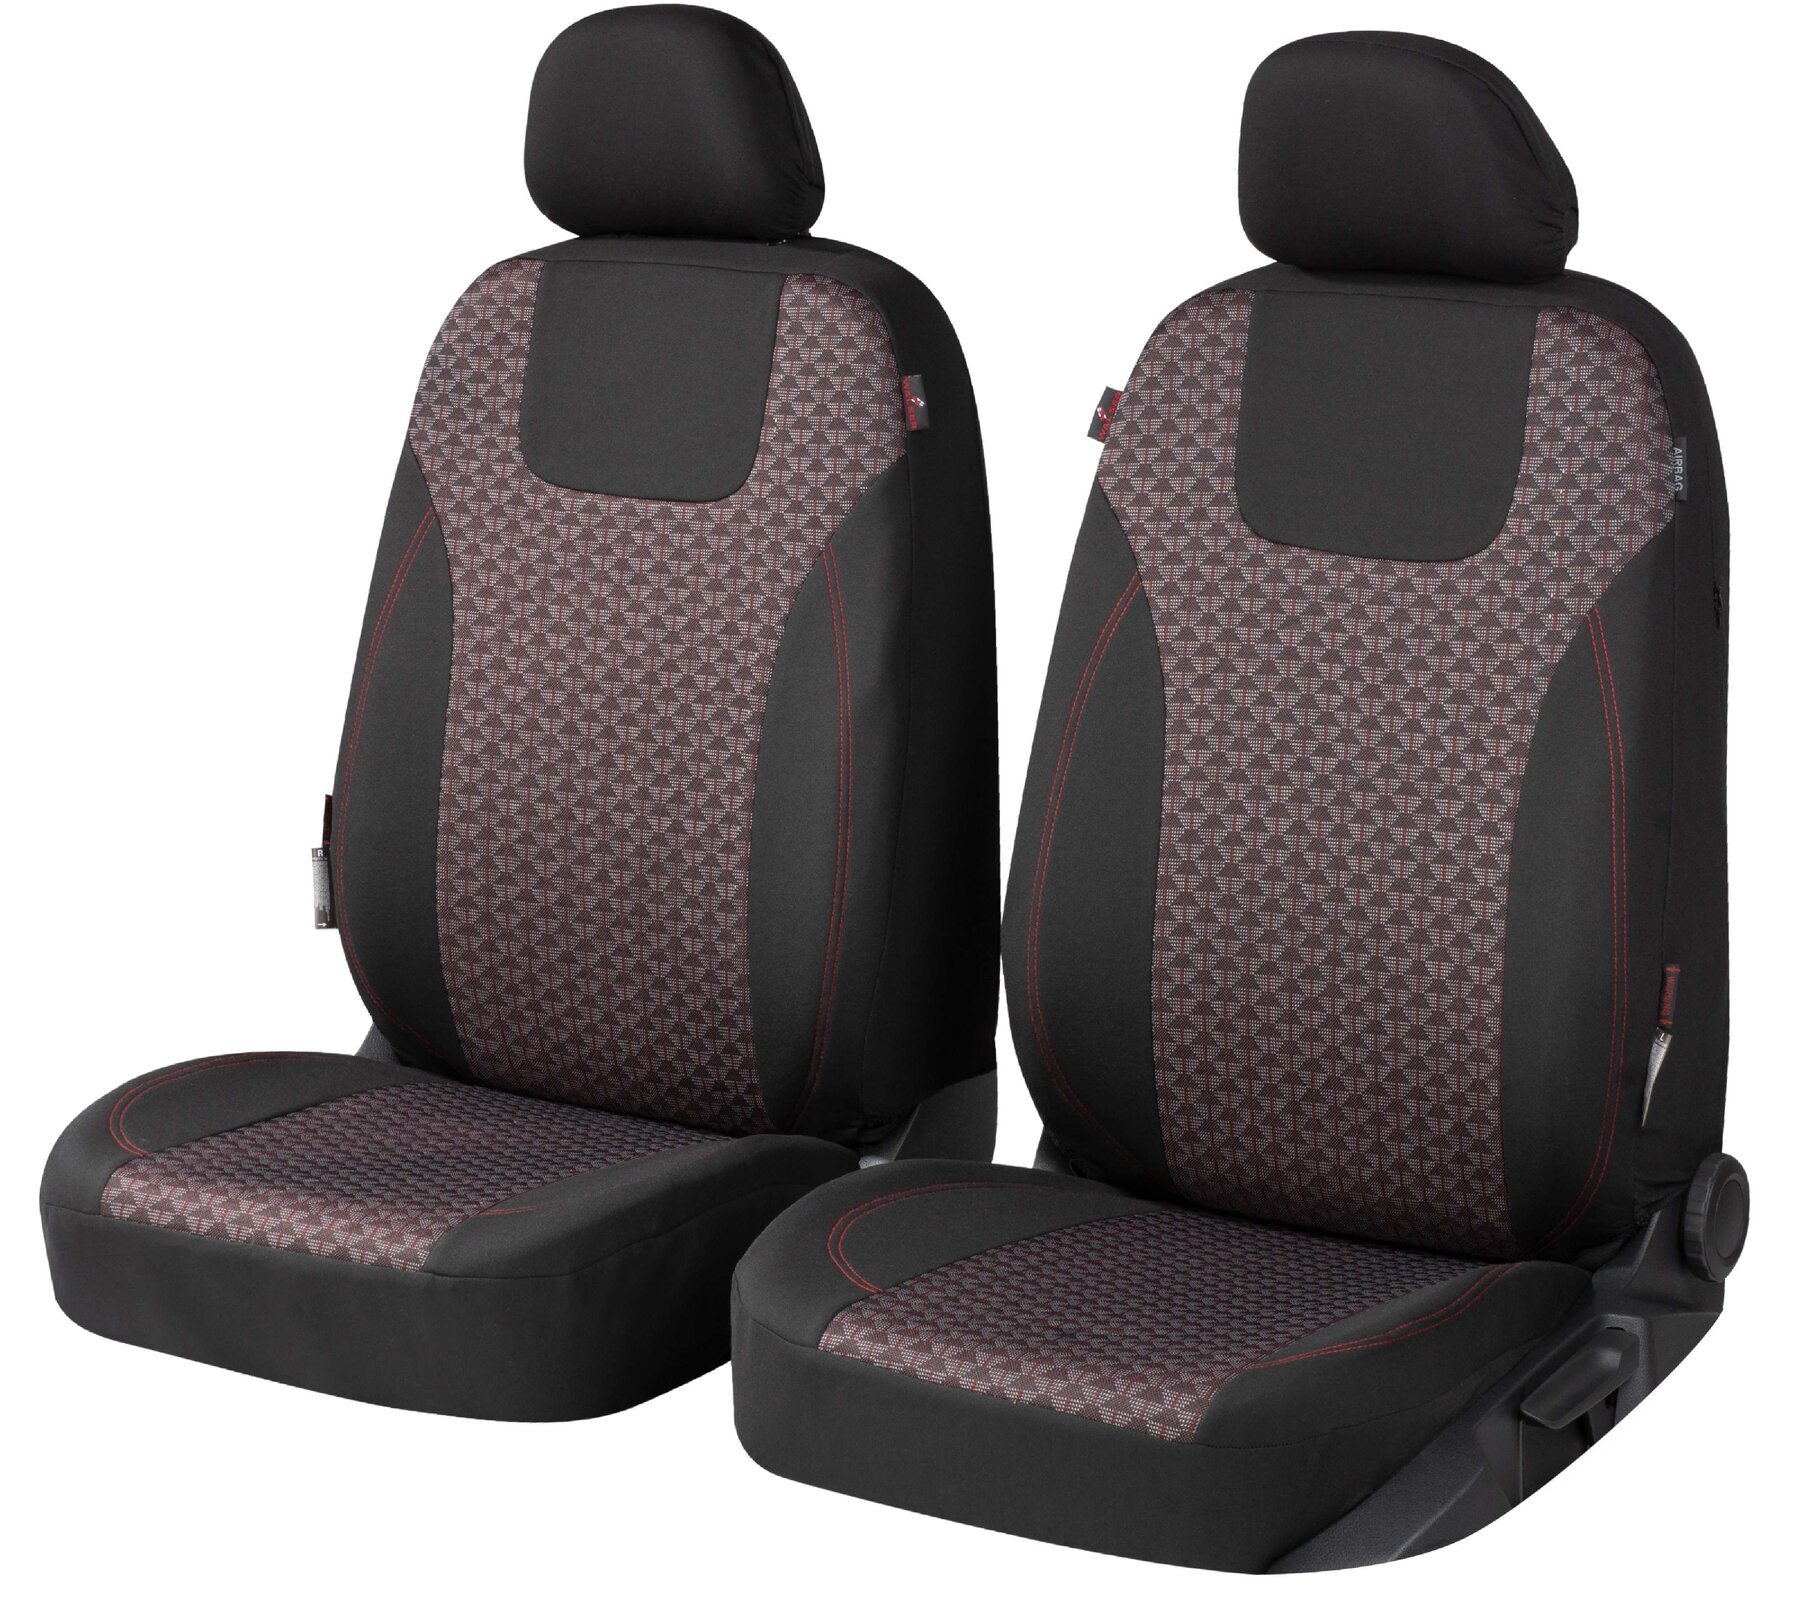 ZIPP IT Premium Car seat covers Redring for two front seats with zip-system black/red